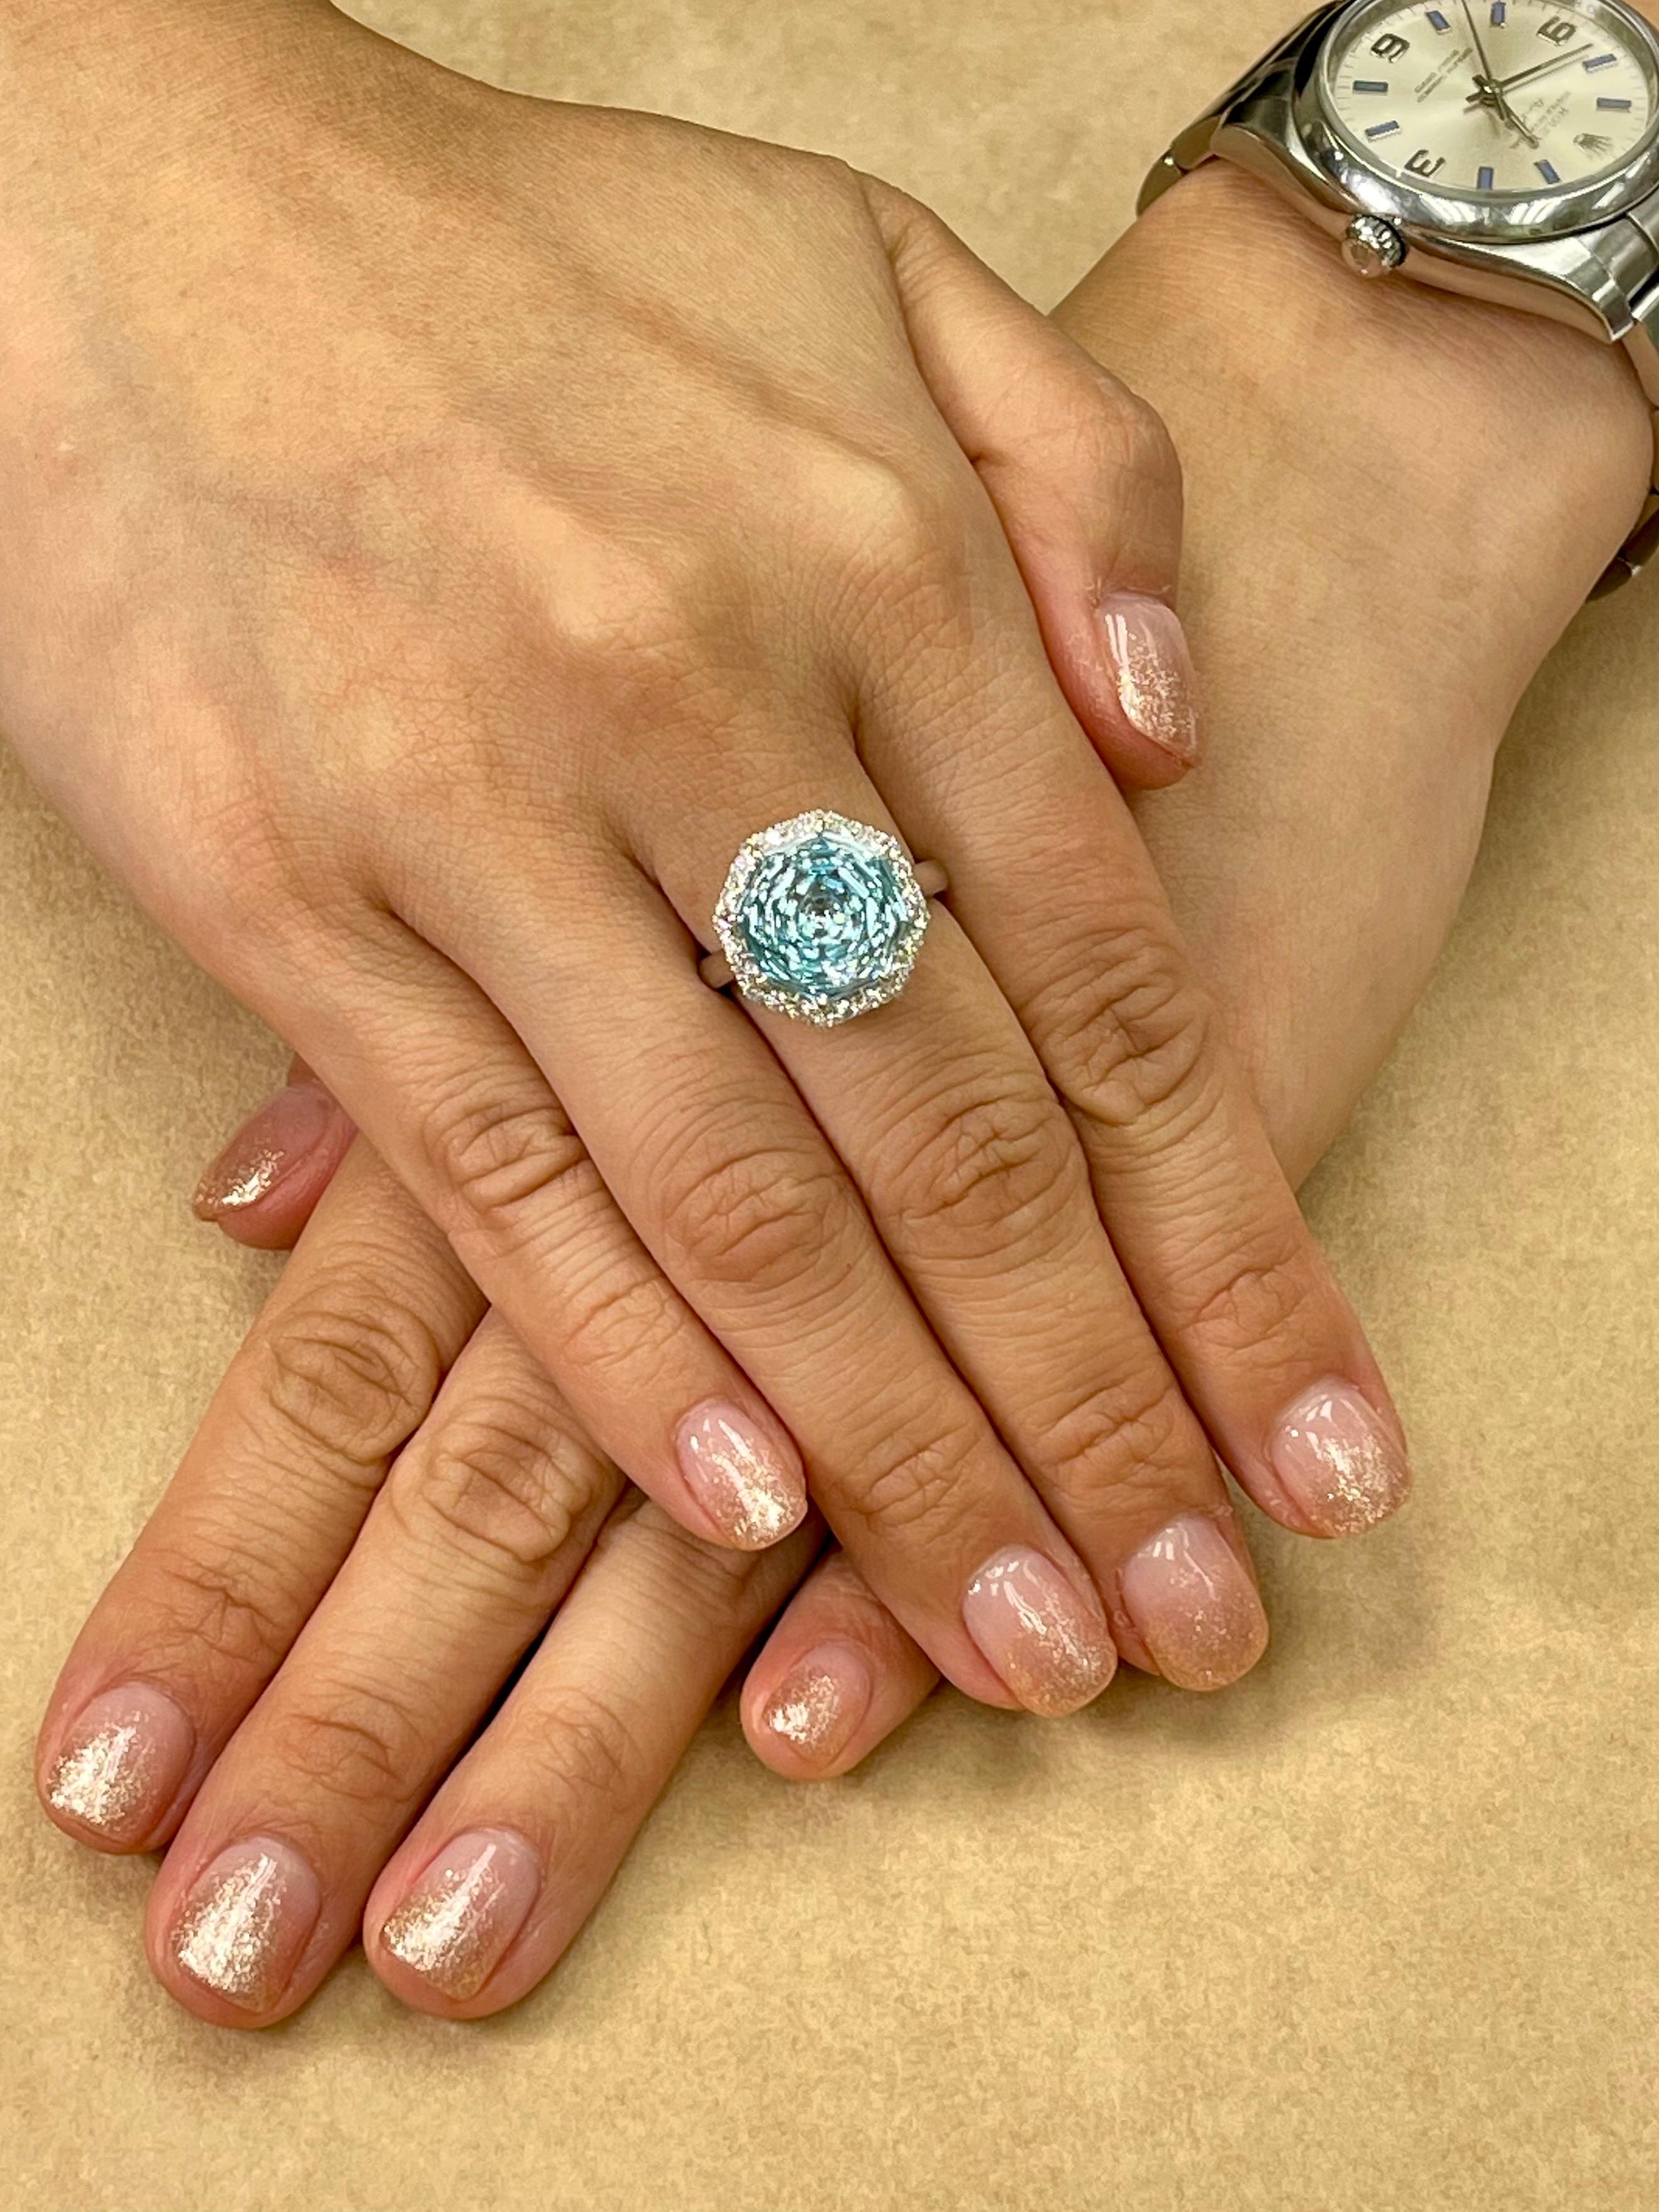 Please check out the HD video! Here is a super unique flower cut powder blue Topaz and diamond cocktail statement ring. It is set in 18k white gold. The 7.86 cts center Topaz is stunning. The flower cut is spectacular and is rarely seen cut to this